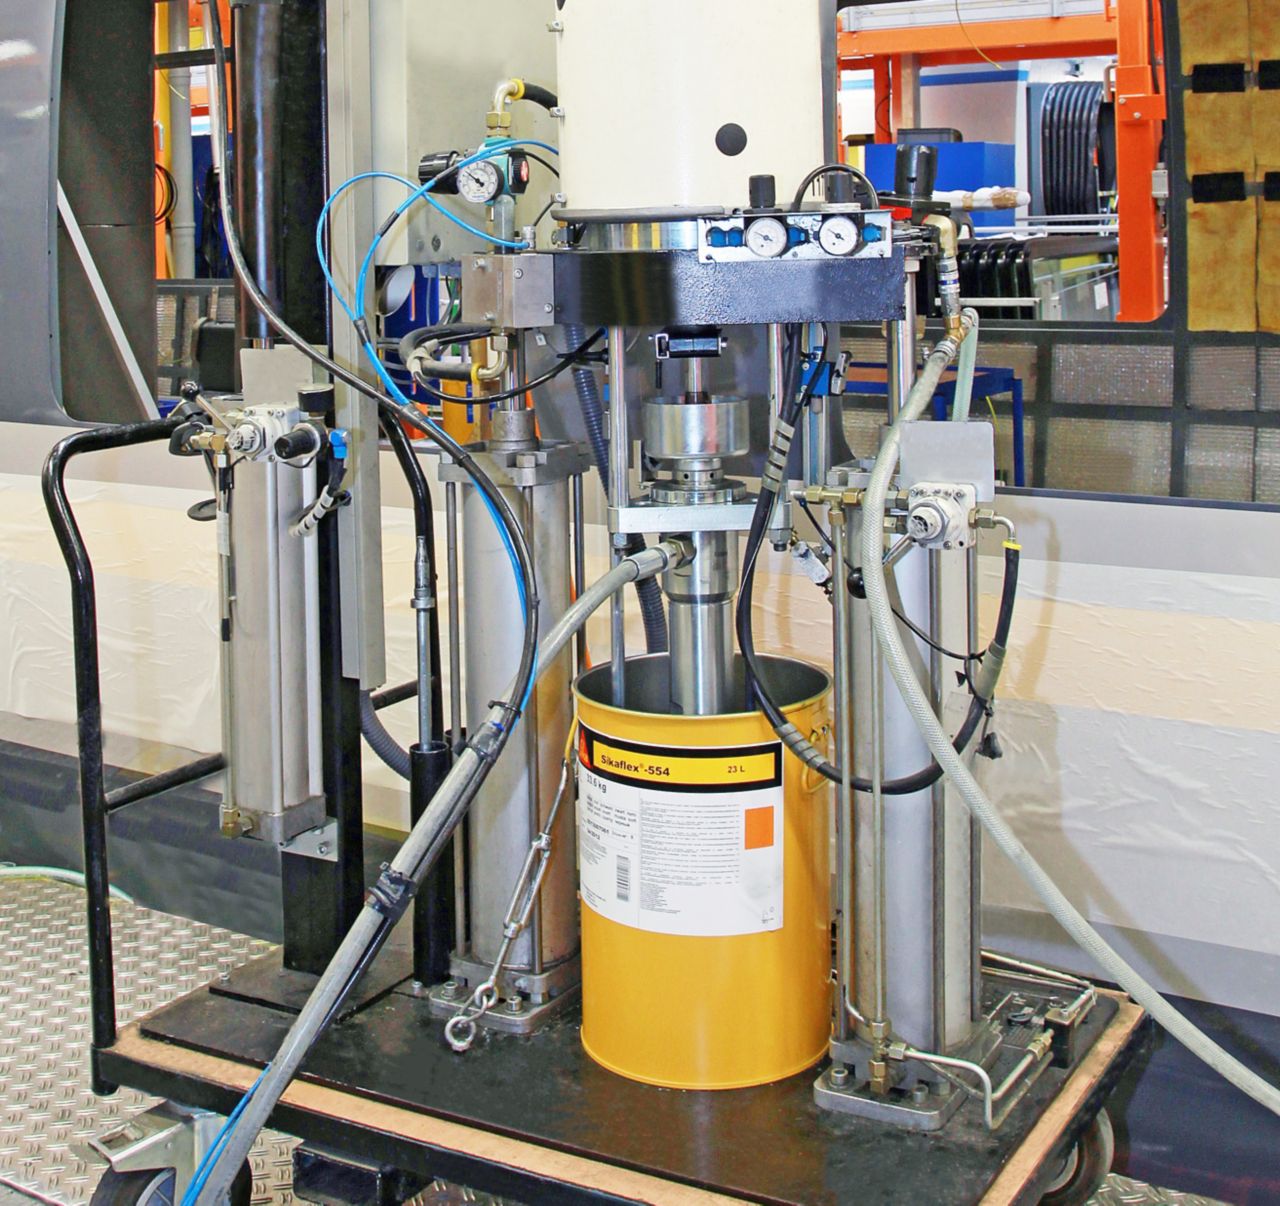 Booster application and pump system